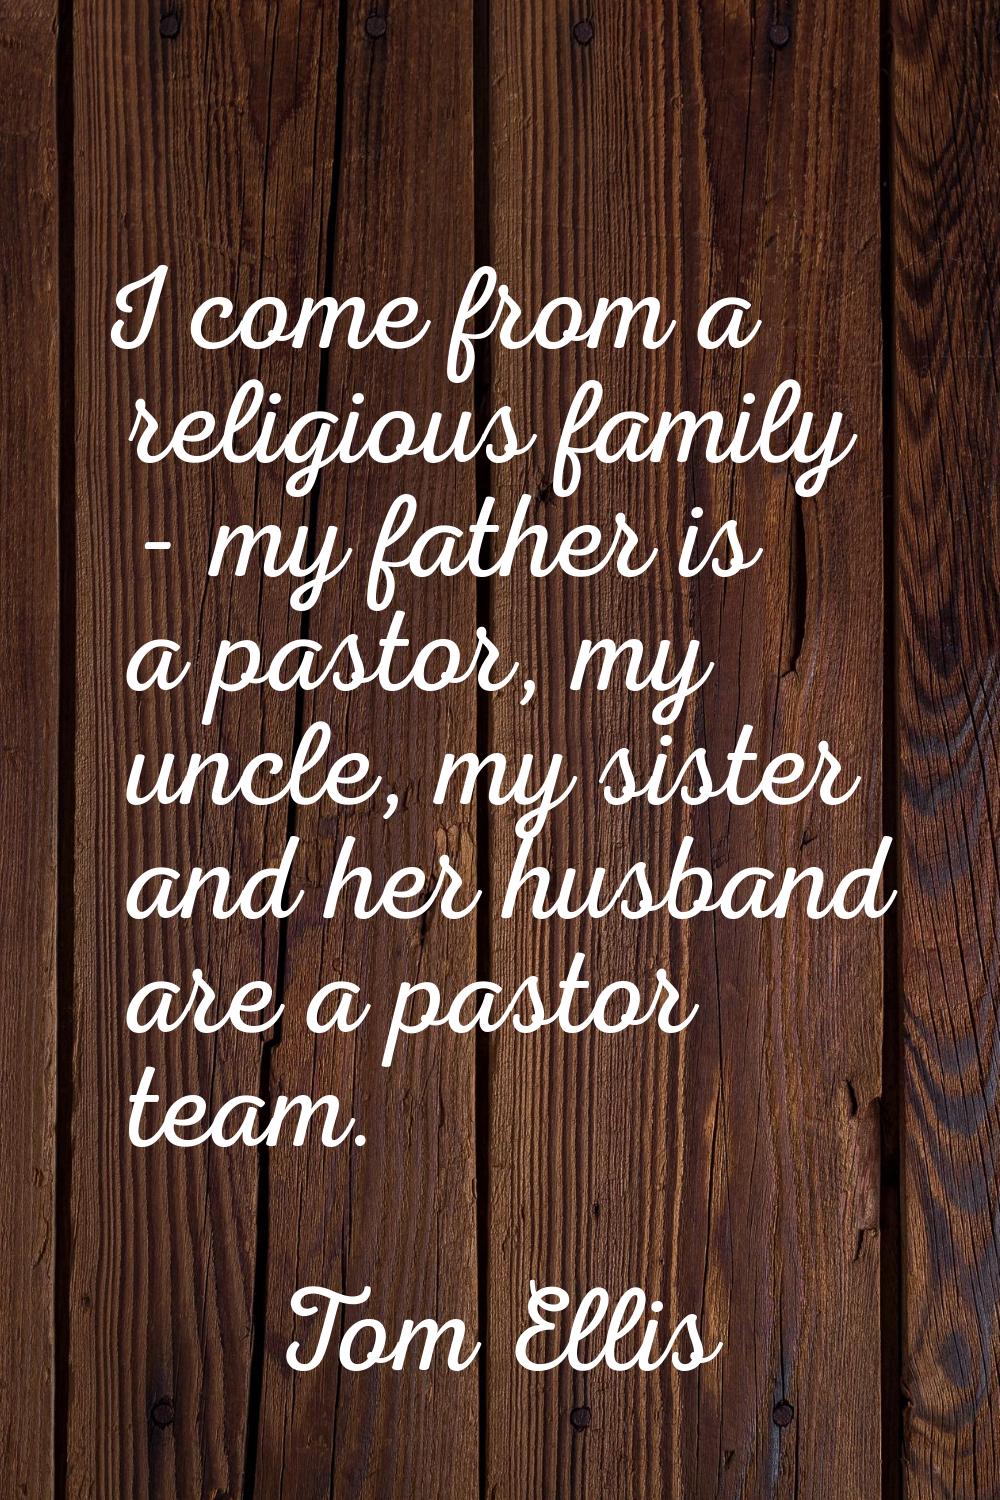 I come from a religious family - my father is a pastor, my uncle, my sister and her husband are a p